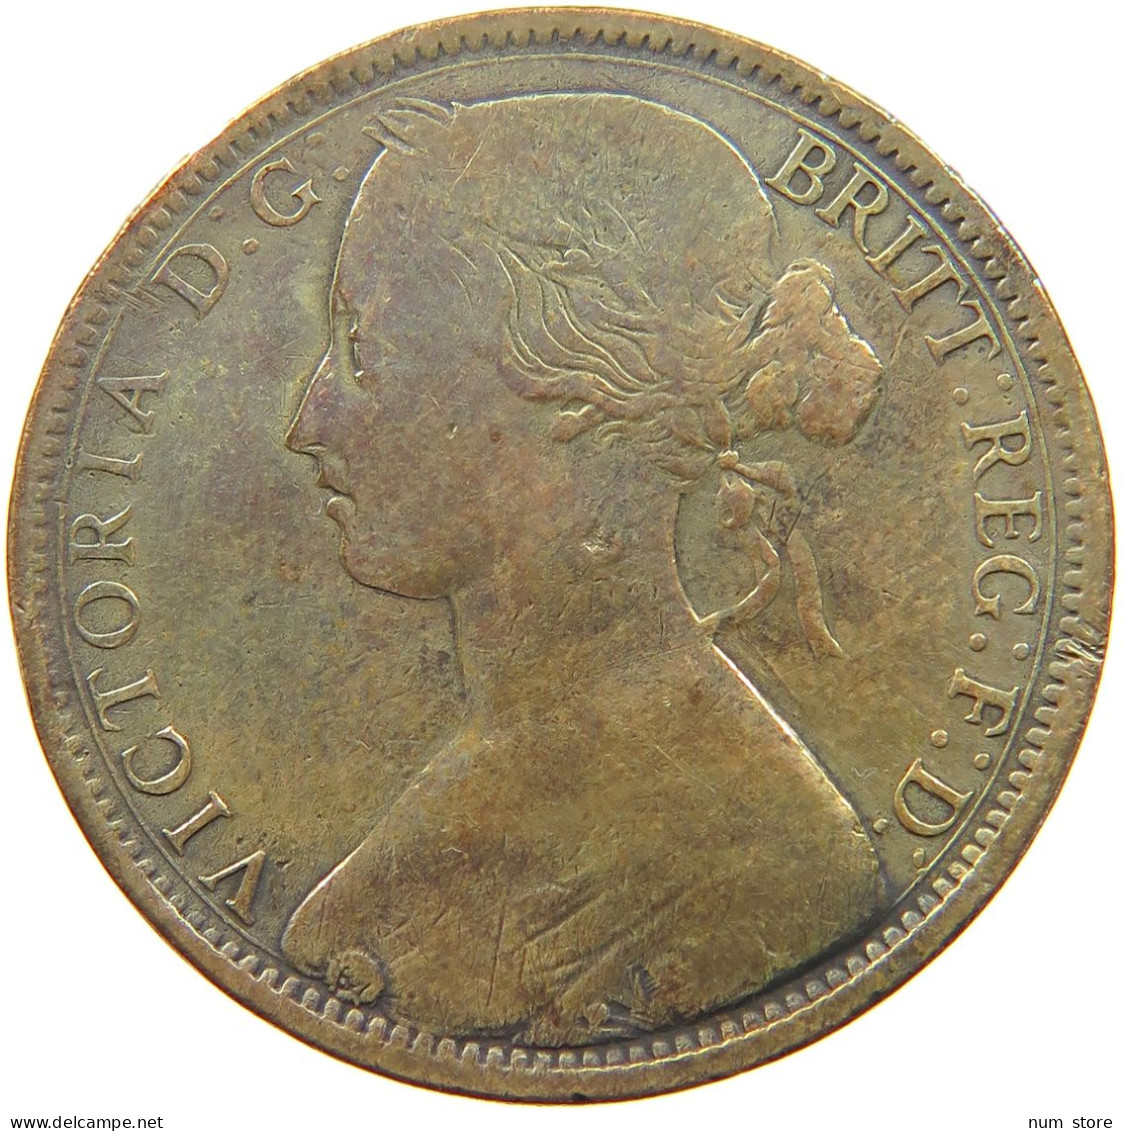 GREAT BRITAIN PENNY 1862 Victoria 1837-1901 #t140 0533 - D. 1 Penny